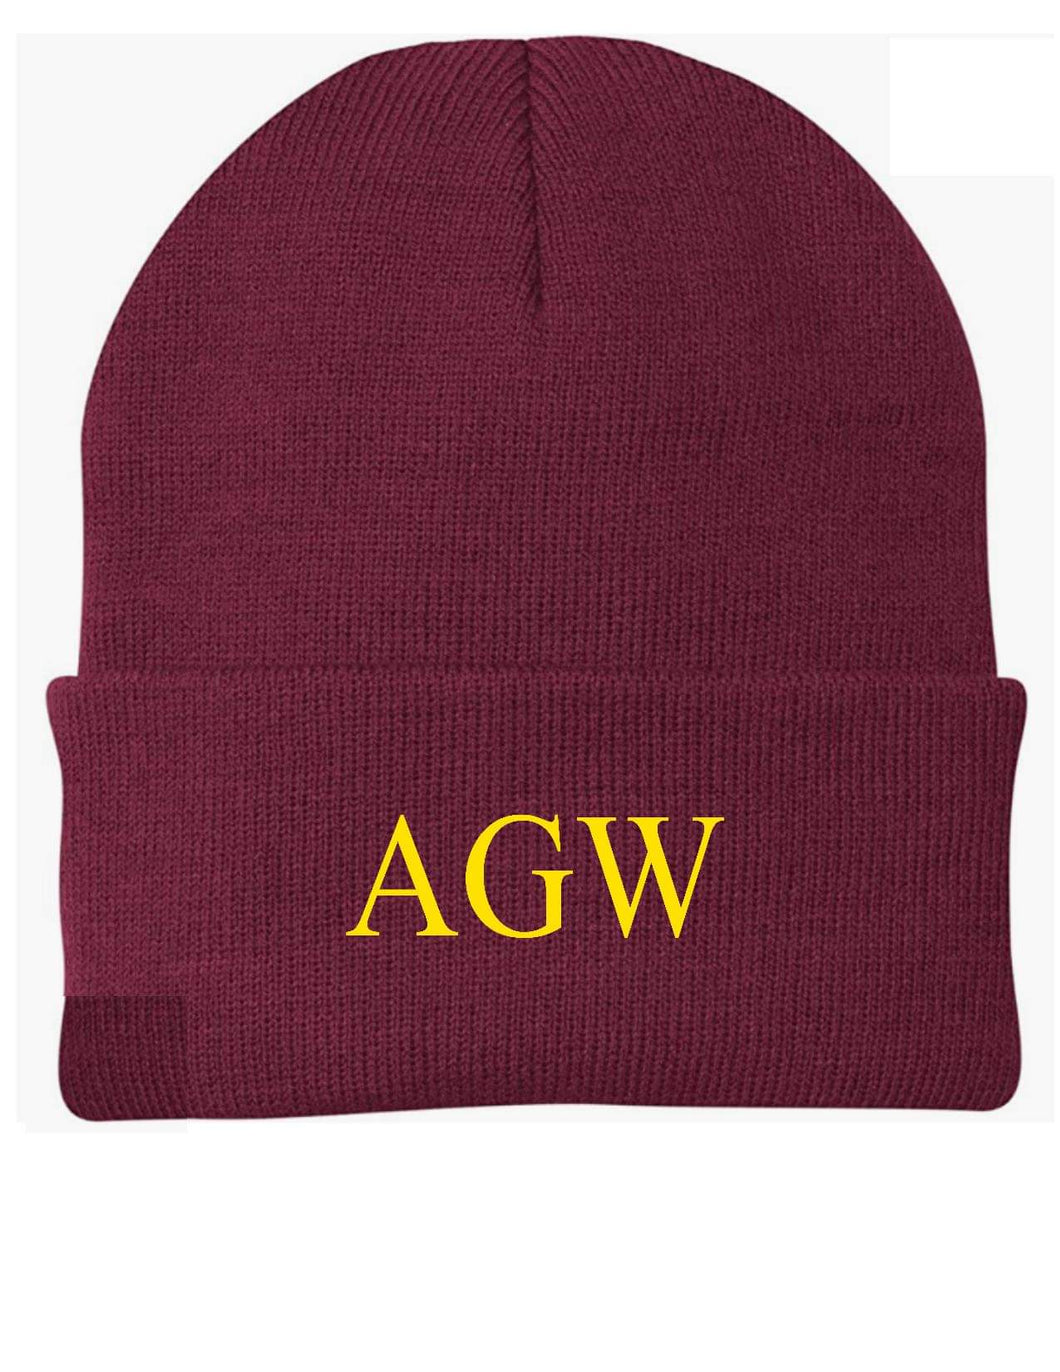 Maroon Beanie with AGW embroidered in yellow gold thead